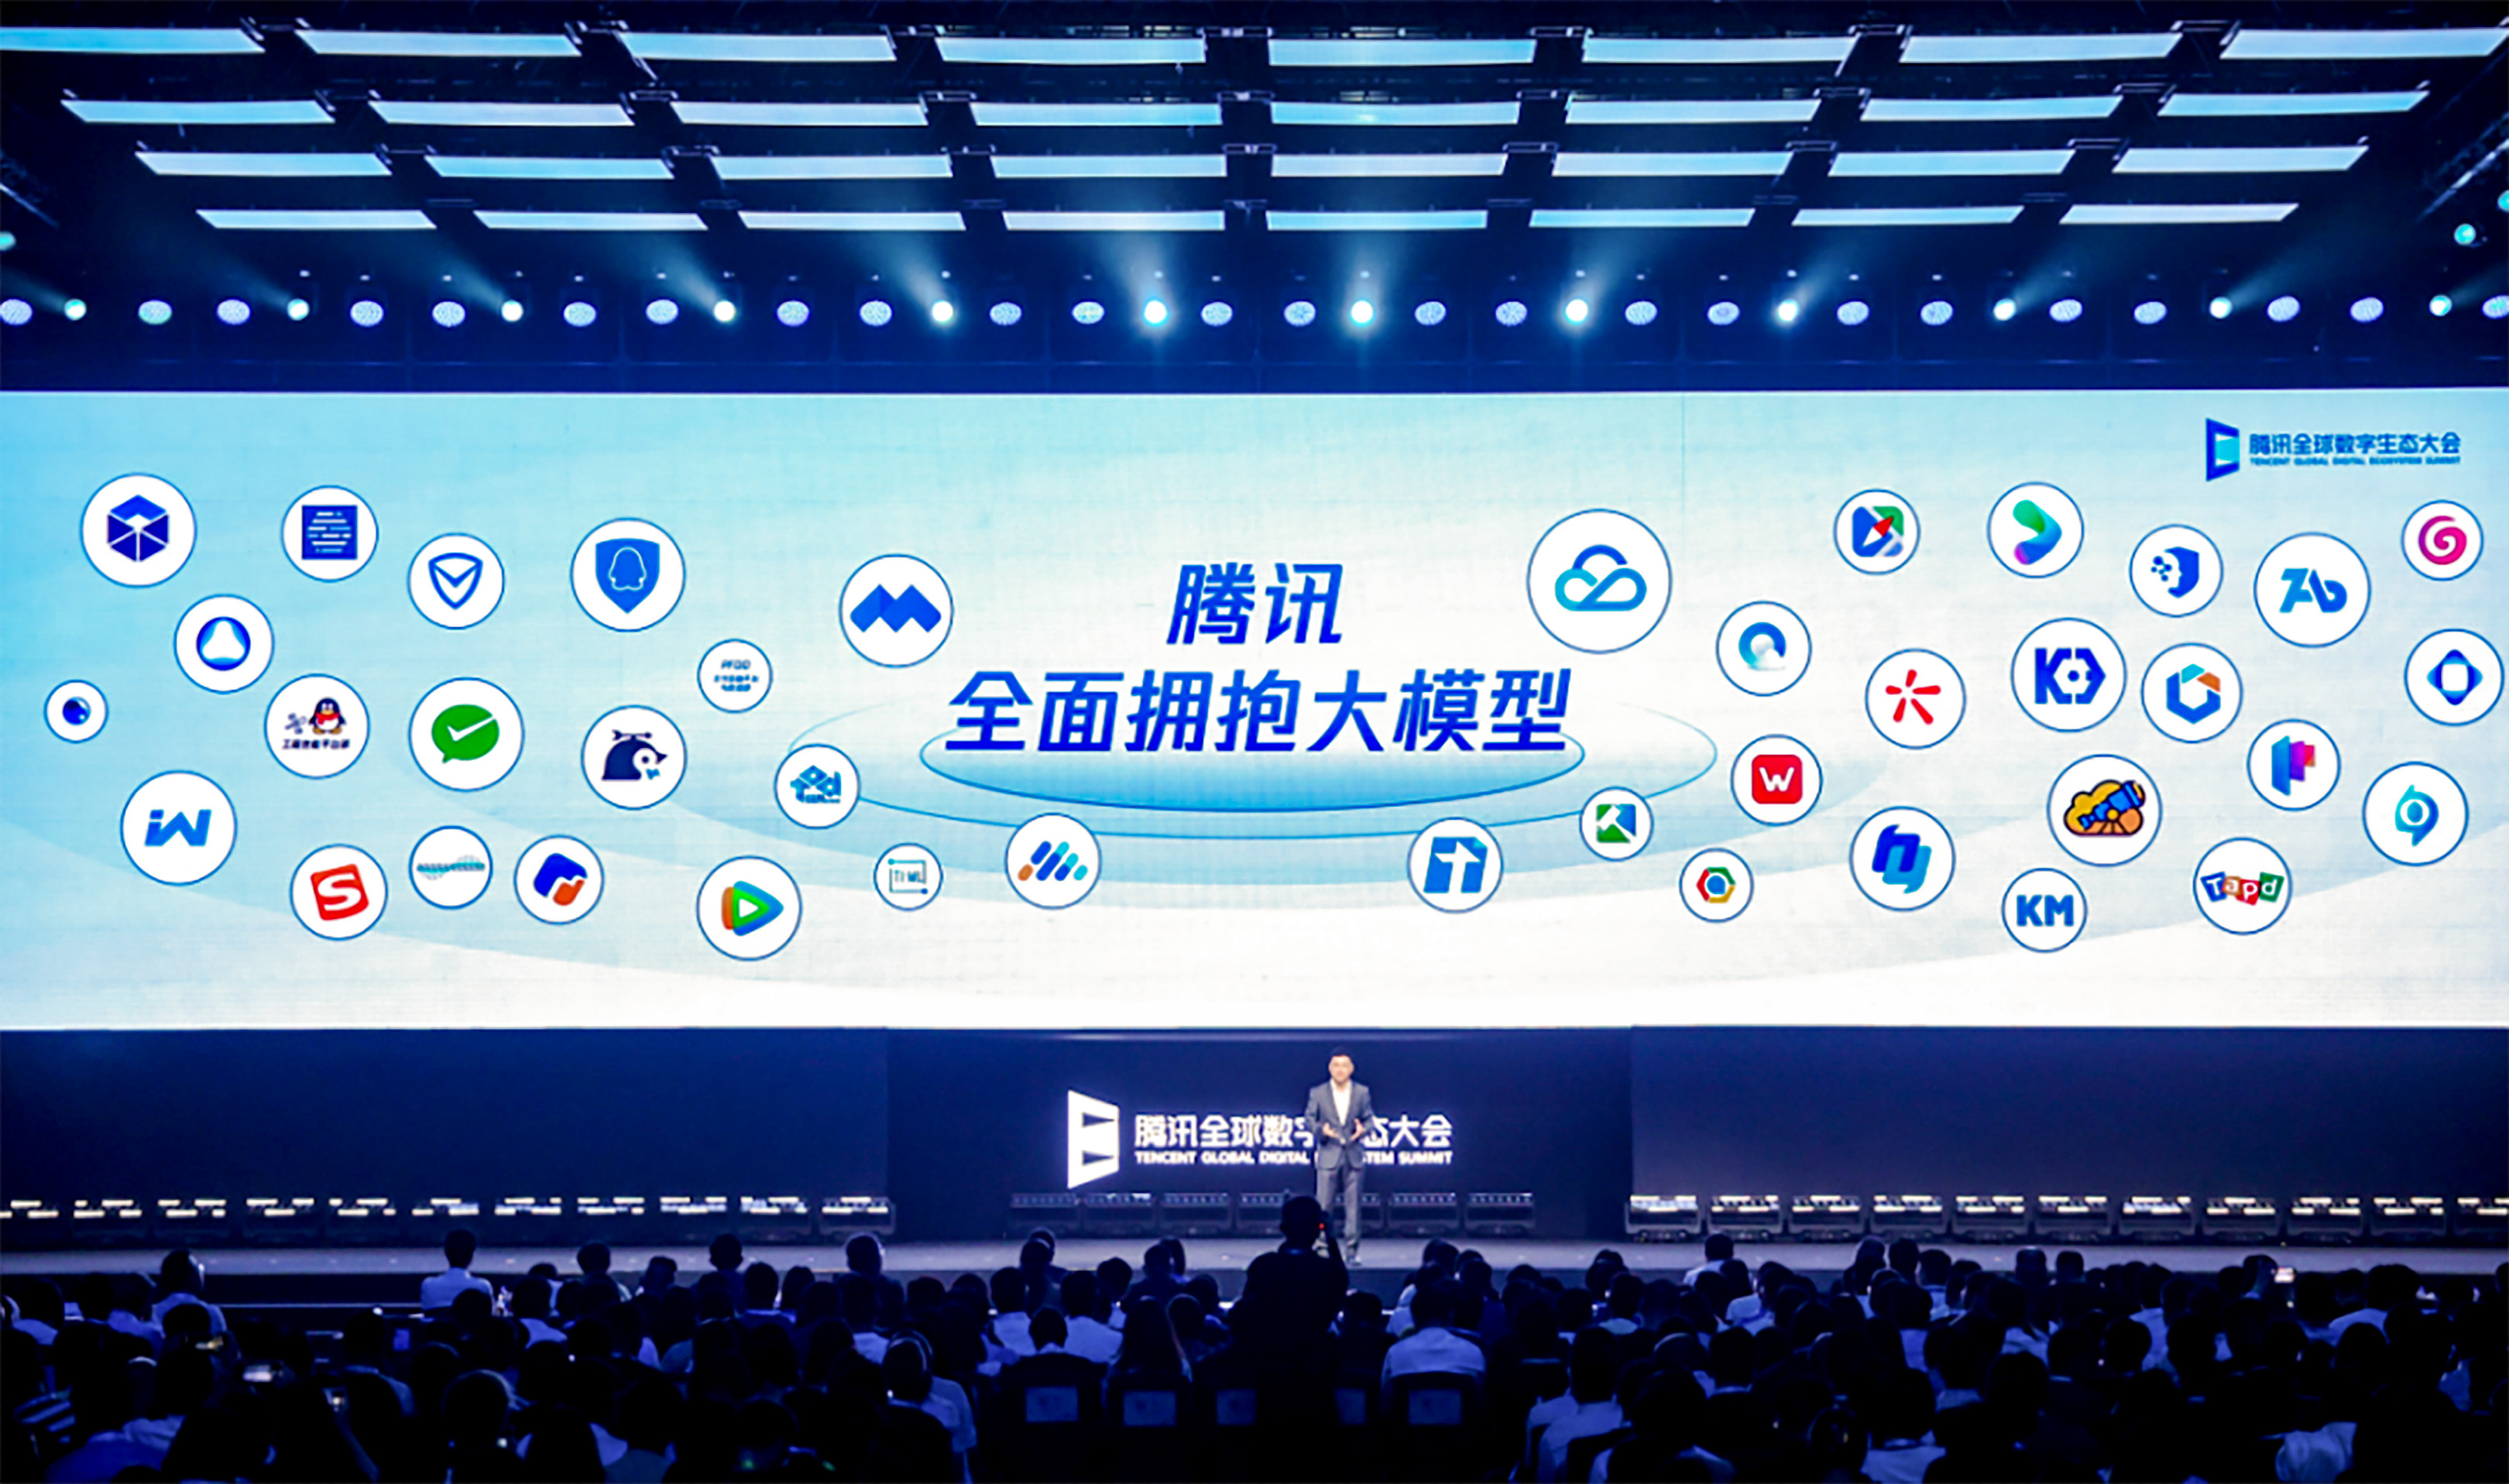 Tencent Holdings introduced its foundation artificial intelligence model called Hunyuan at the company’s Global Digital Ecosystem Summit in Shenzhen on September 7, 2023. Photo: Handout